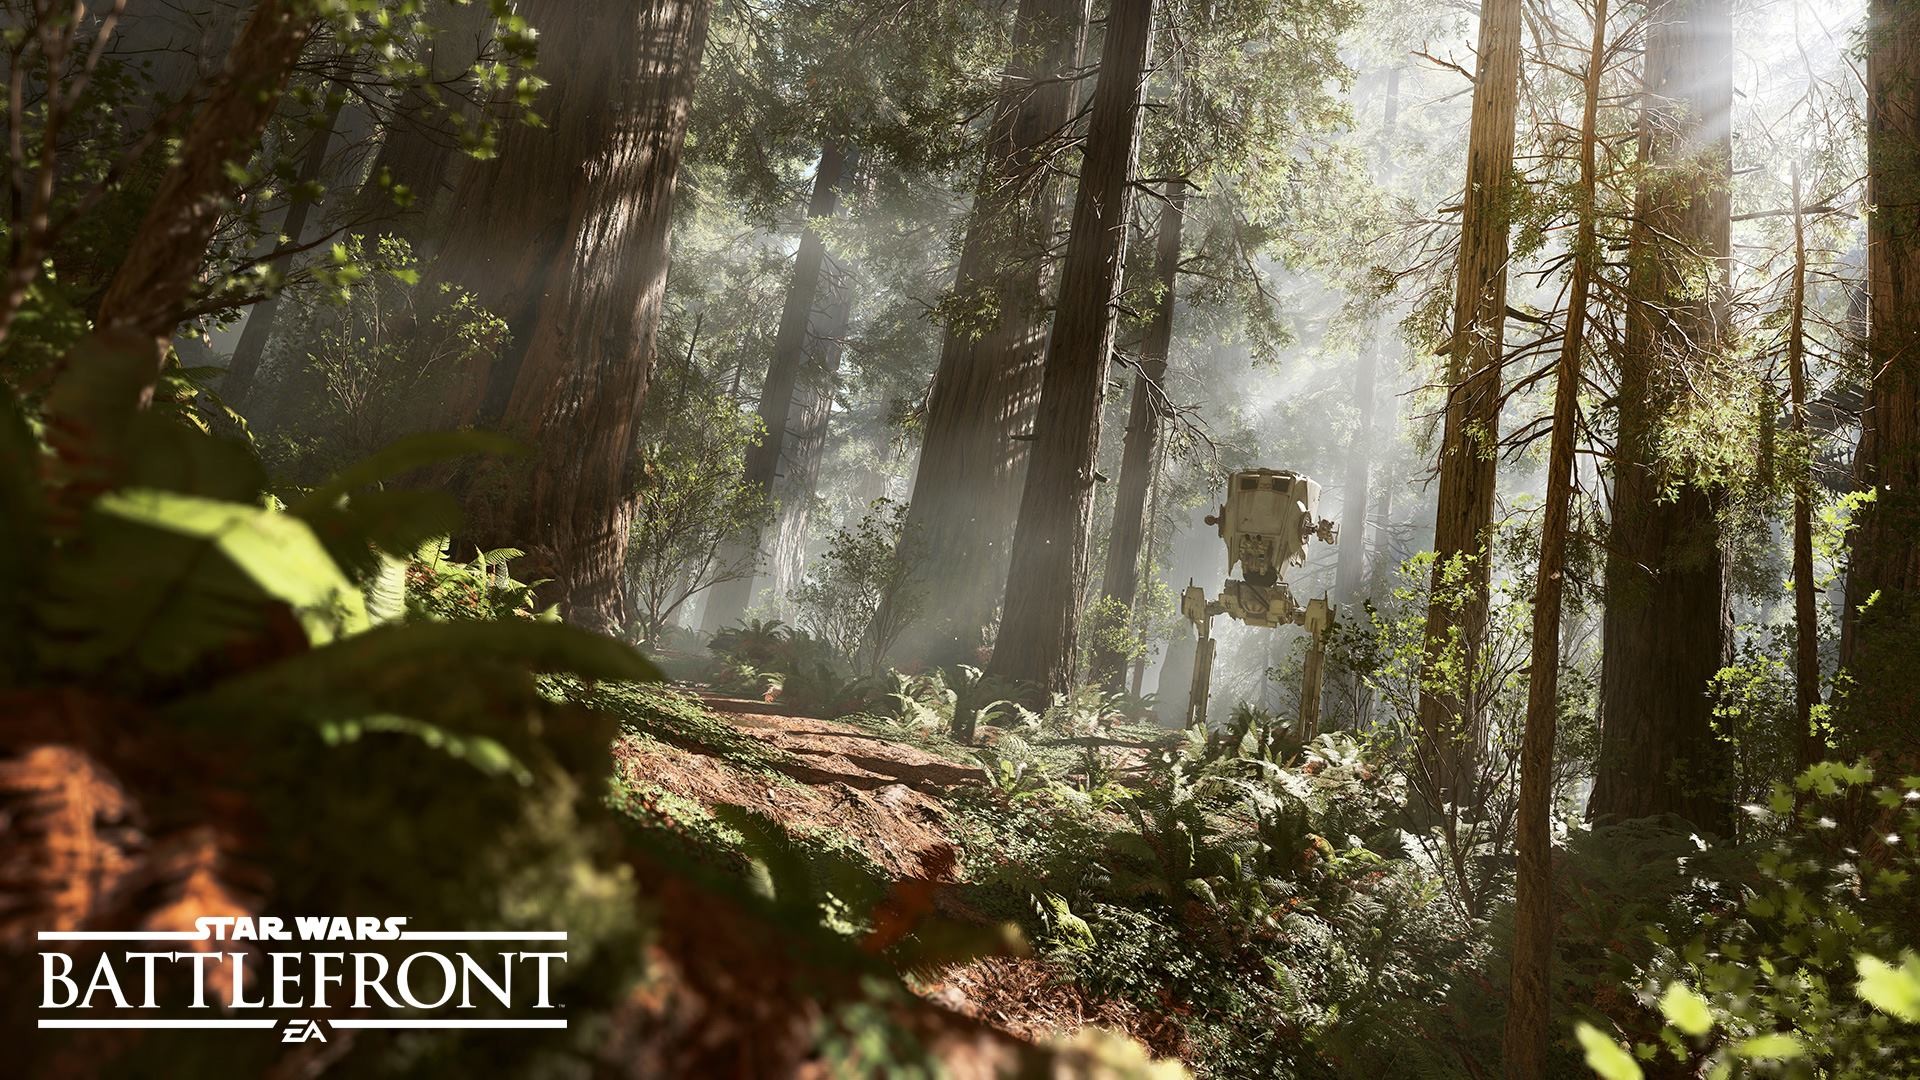 General 1920x1080 Star Wars Star Wars: Battlefront Endor Battle of Endor AT-ST trees Galactic Empire AT-ST Walker video games PC gaming video game art science fiction Electronic Arts EA DICE